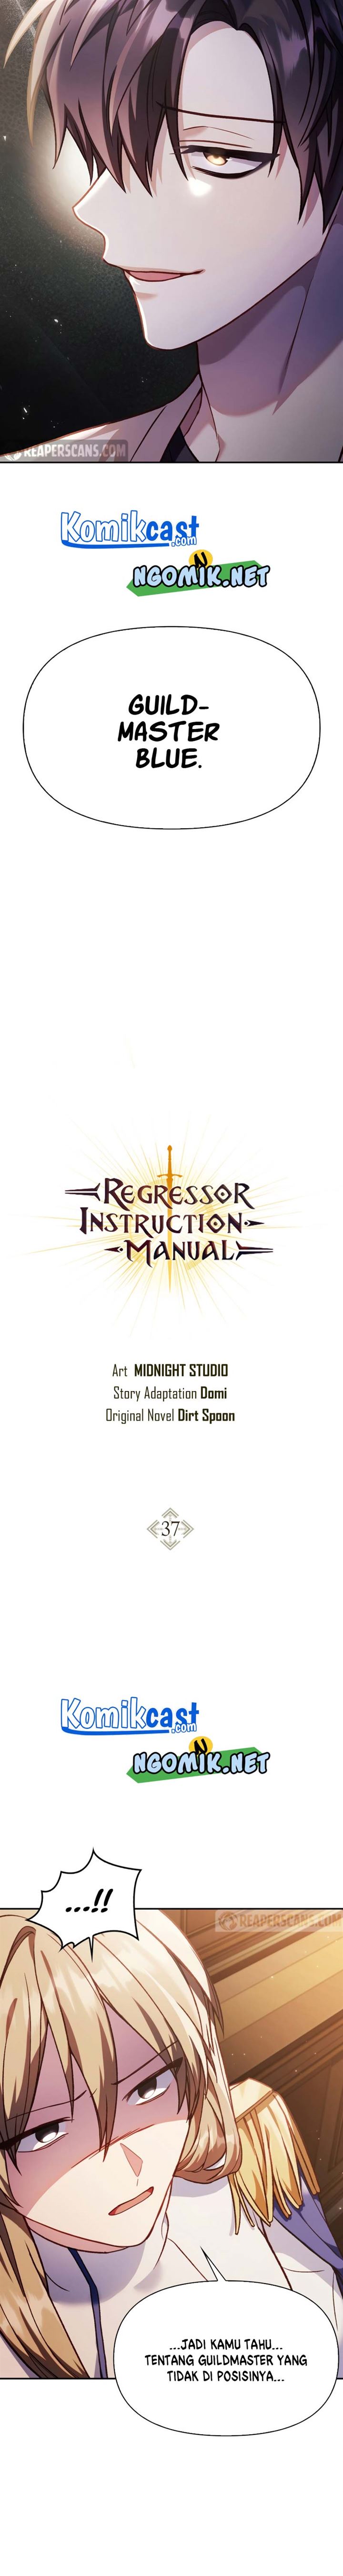 The Regressor Instruction Manual Chapter 37 - 213